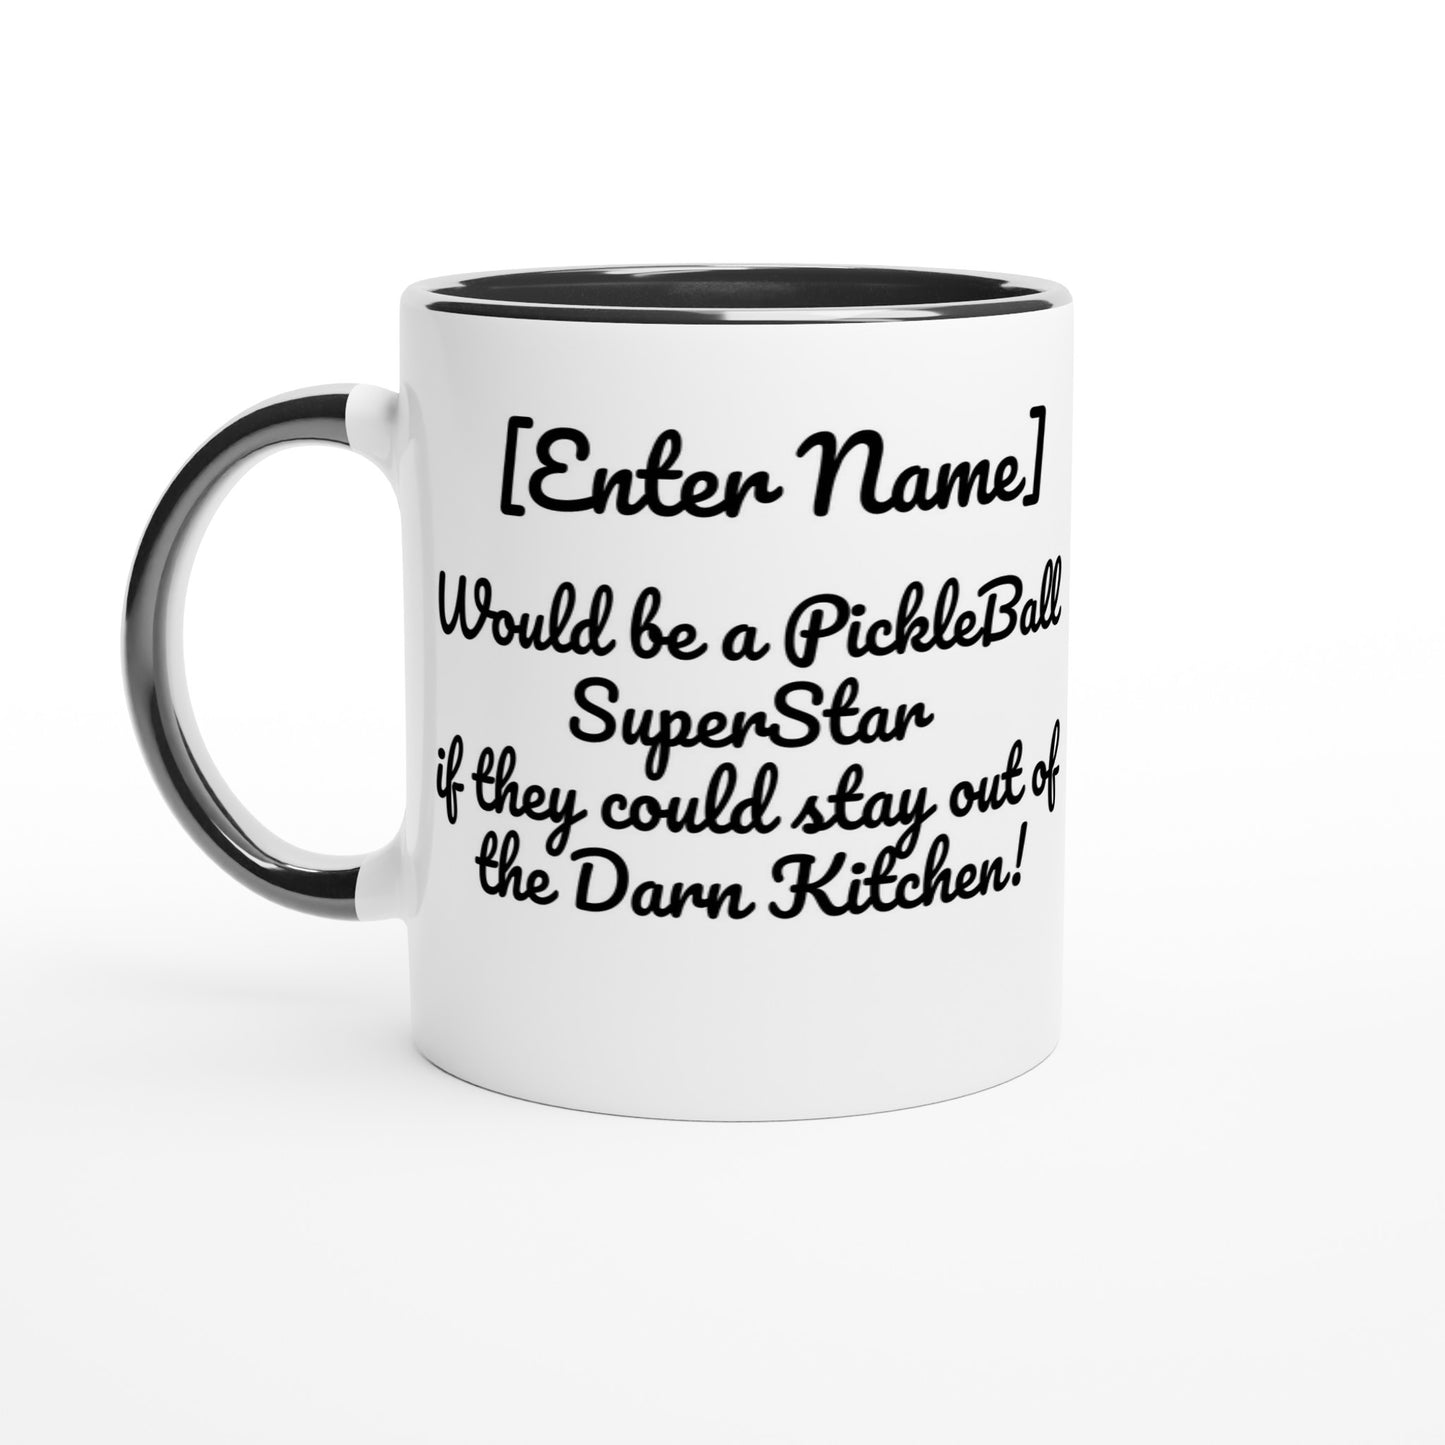 Personalized White ceramic 11oz mug with black handle Personalized with motto Your Name Would be a PickleBall Superstar if they could stay out of the Darn Kitchen front side Let's Play PickleBall logo on back dishwasher and microwave safe ceramic coffee mug from WhatYa Say Apparel front view.